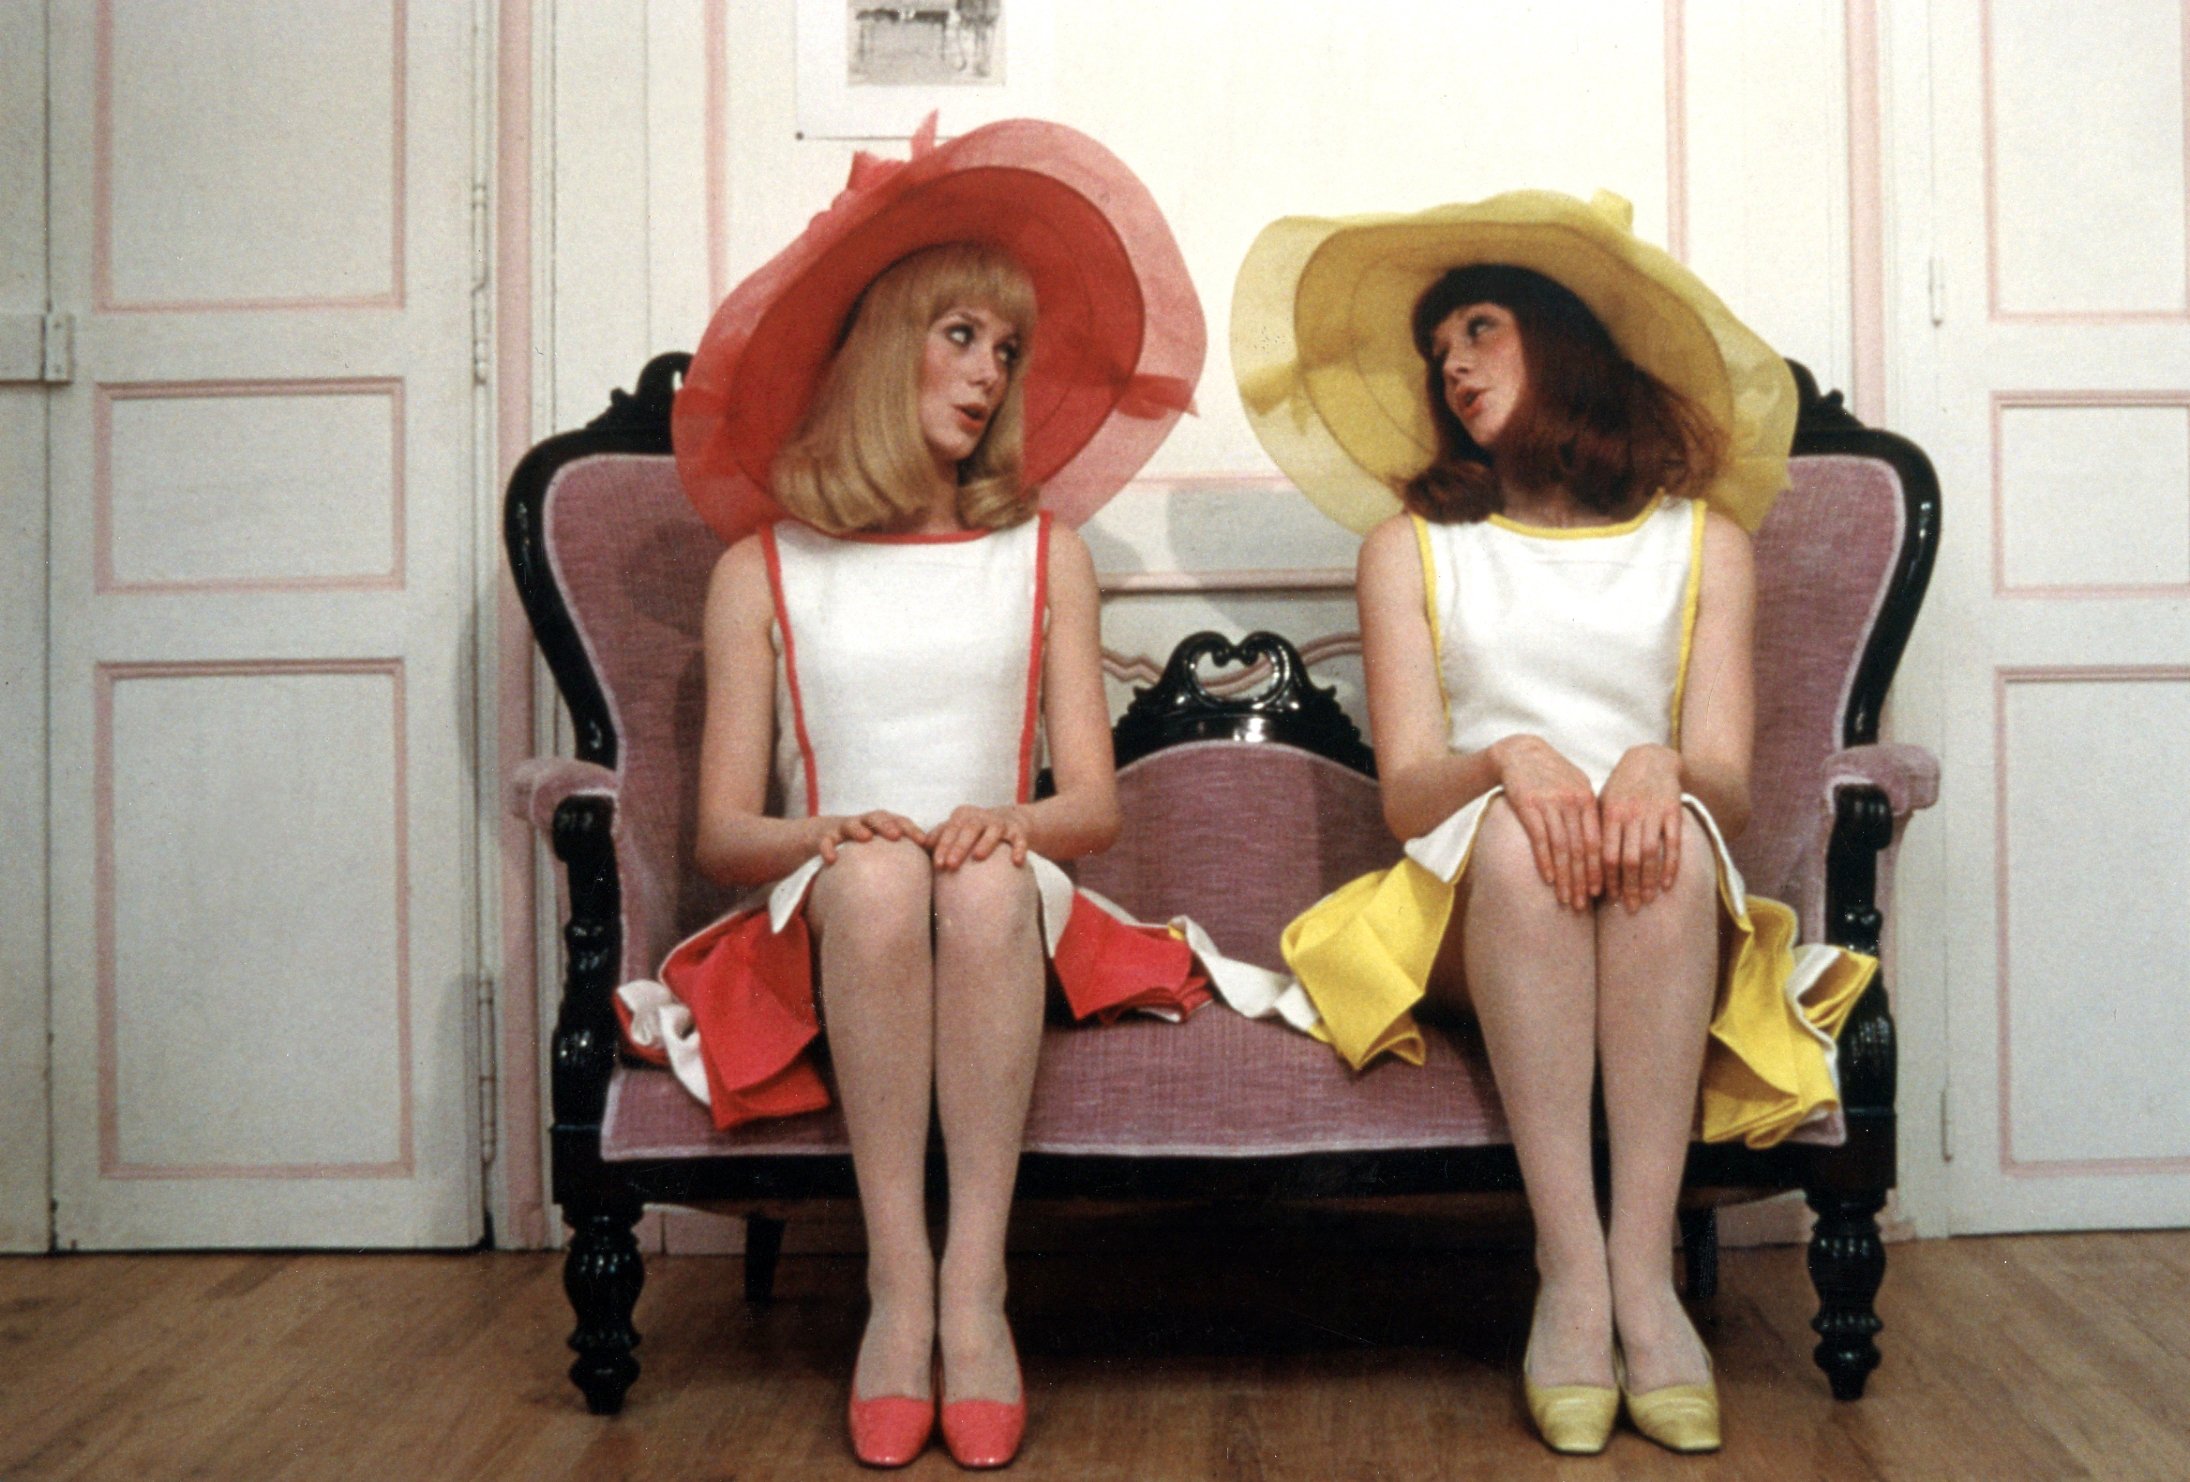 Catherine Deneuve and her sister Françoise Dorleac in Jacques Demy's "The Young Girls of Rochefort," a crucial influence on Chazelle's "La La Land." (Photo courtesy of Janus Films).